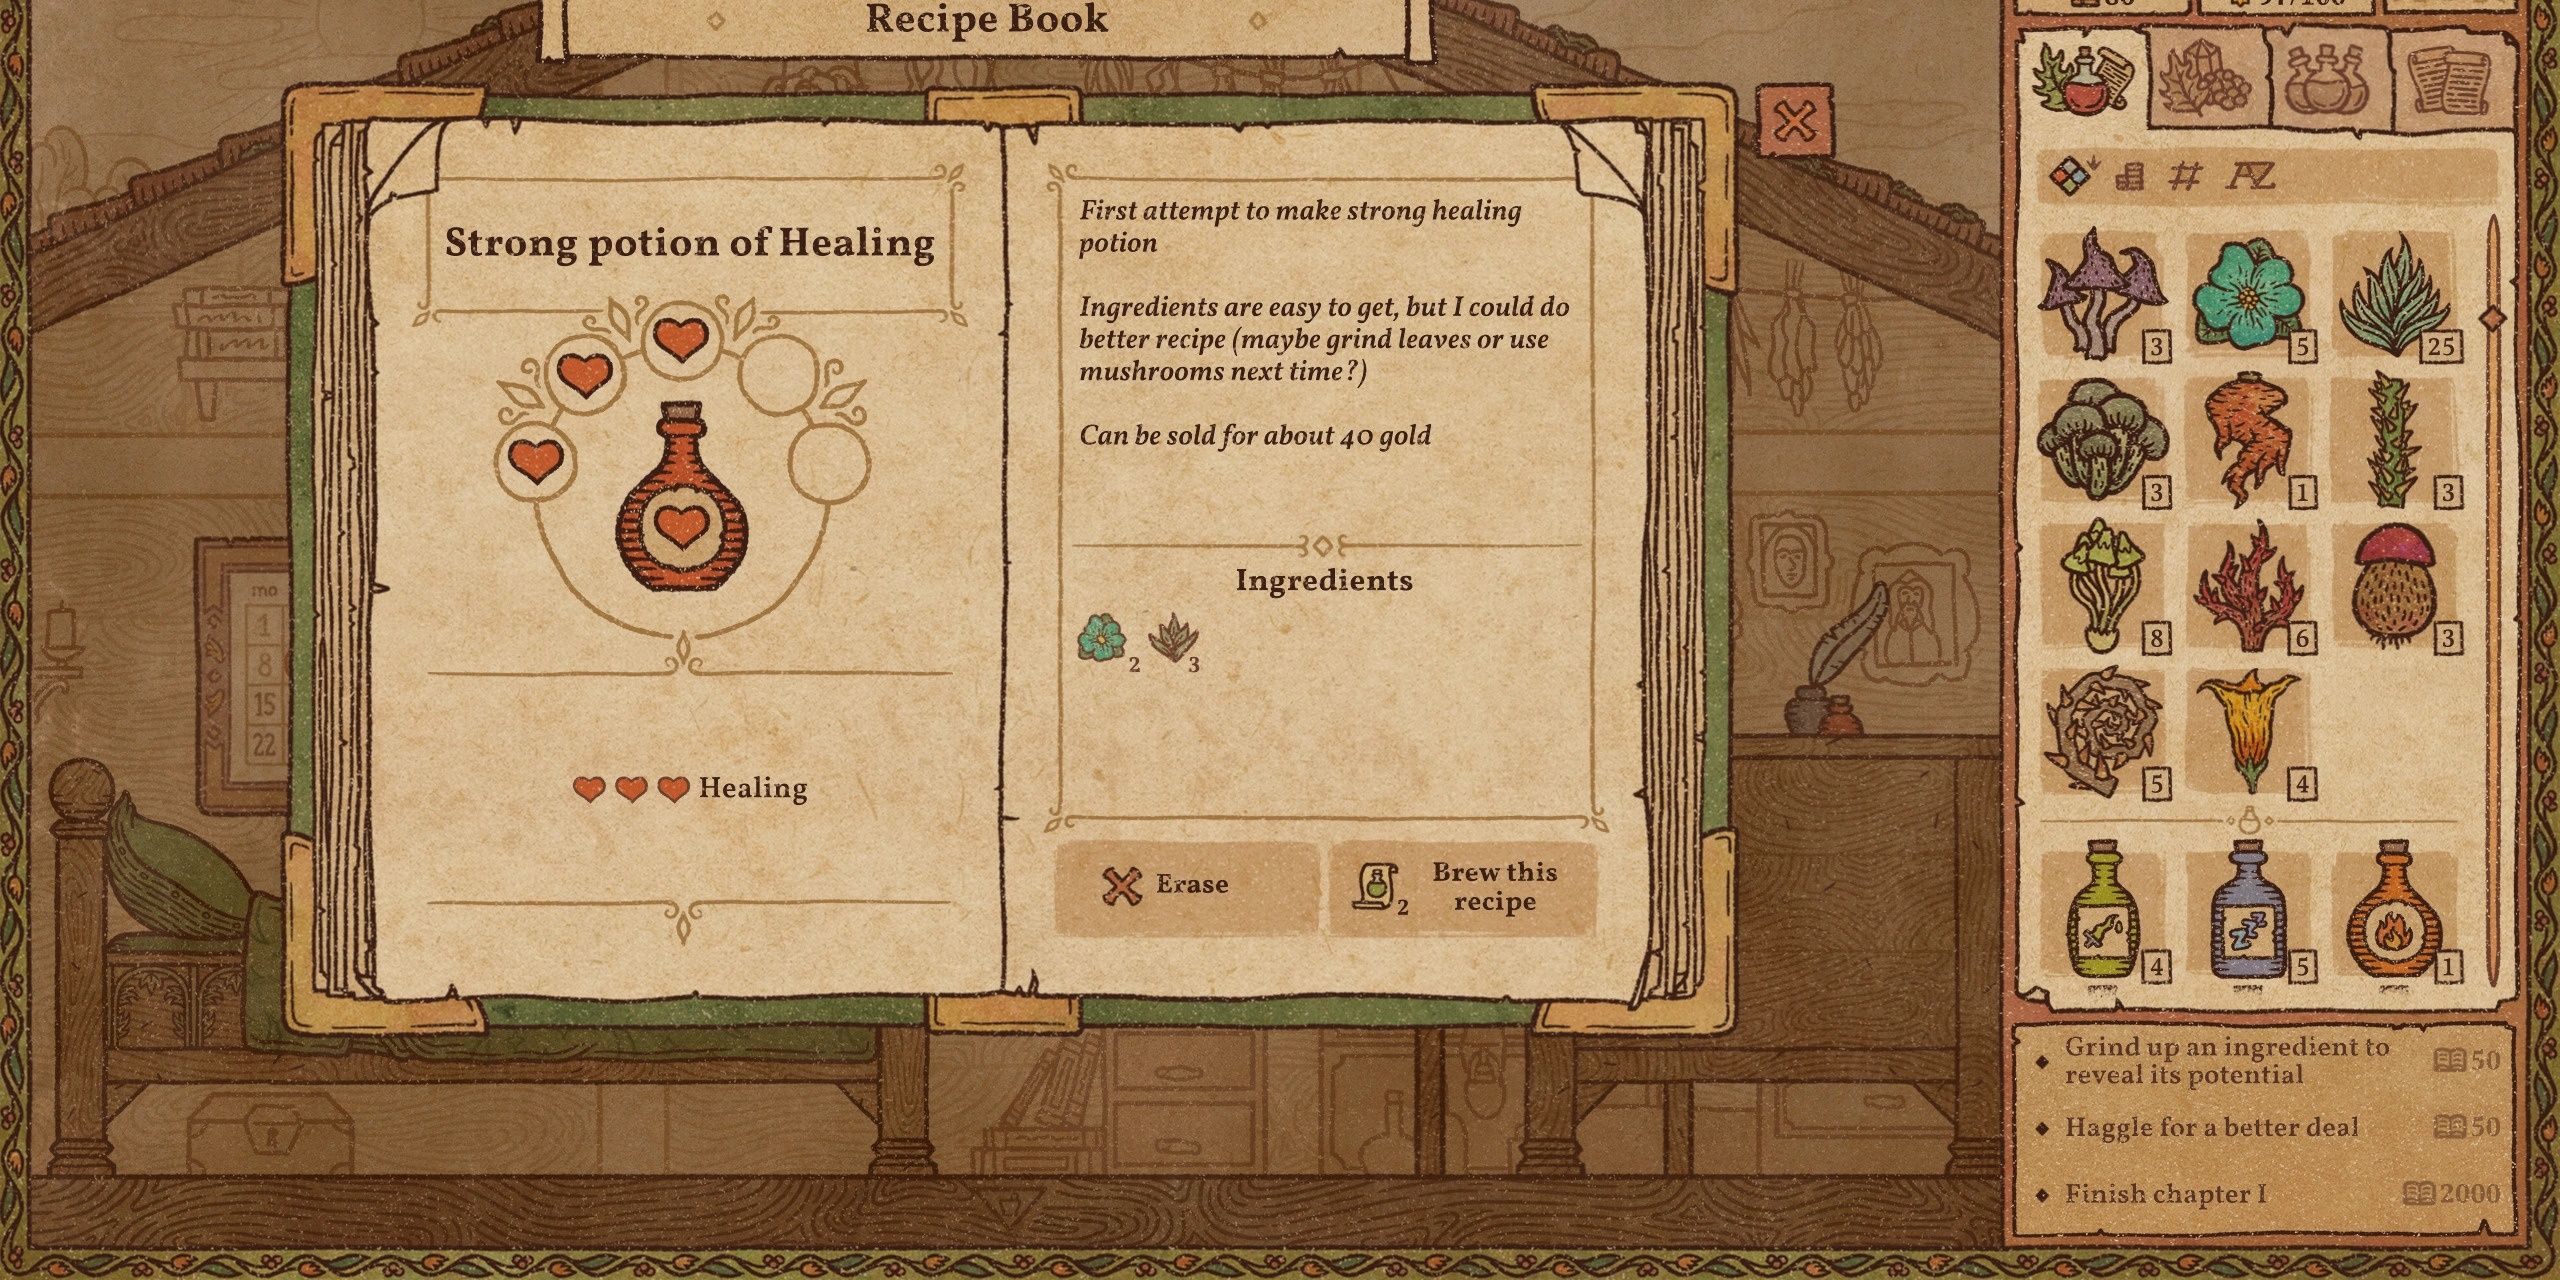 A book page referring to a Strong Potion of Healing.